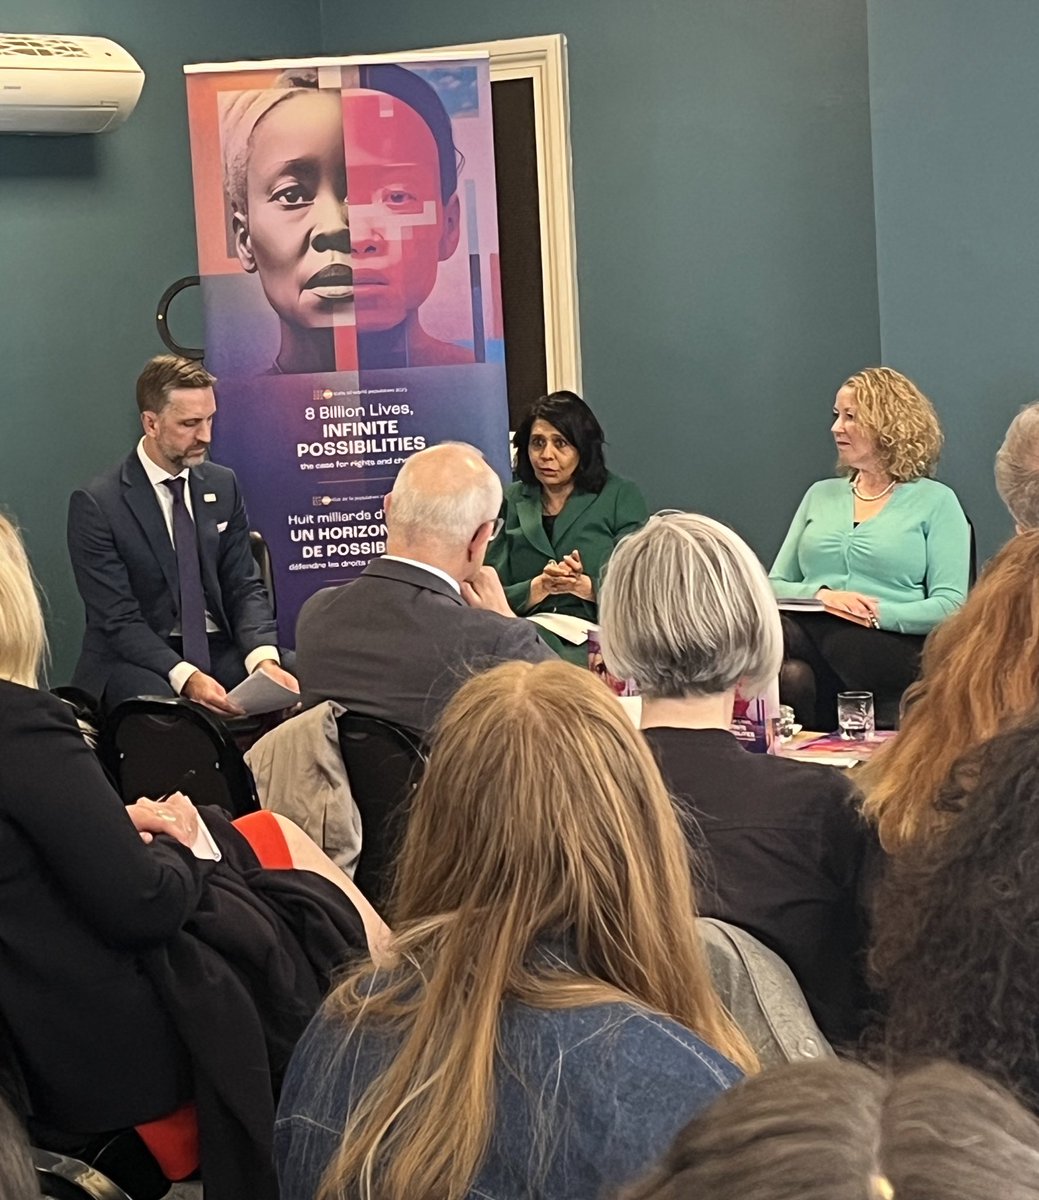 Inequality cuts across everything we are talking about, both fertility and infertility in every context including here in the UK @geetaNargund #8BillionStrong